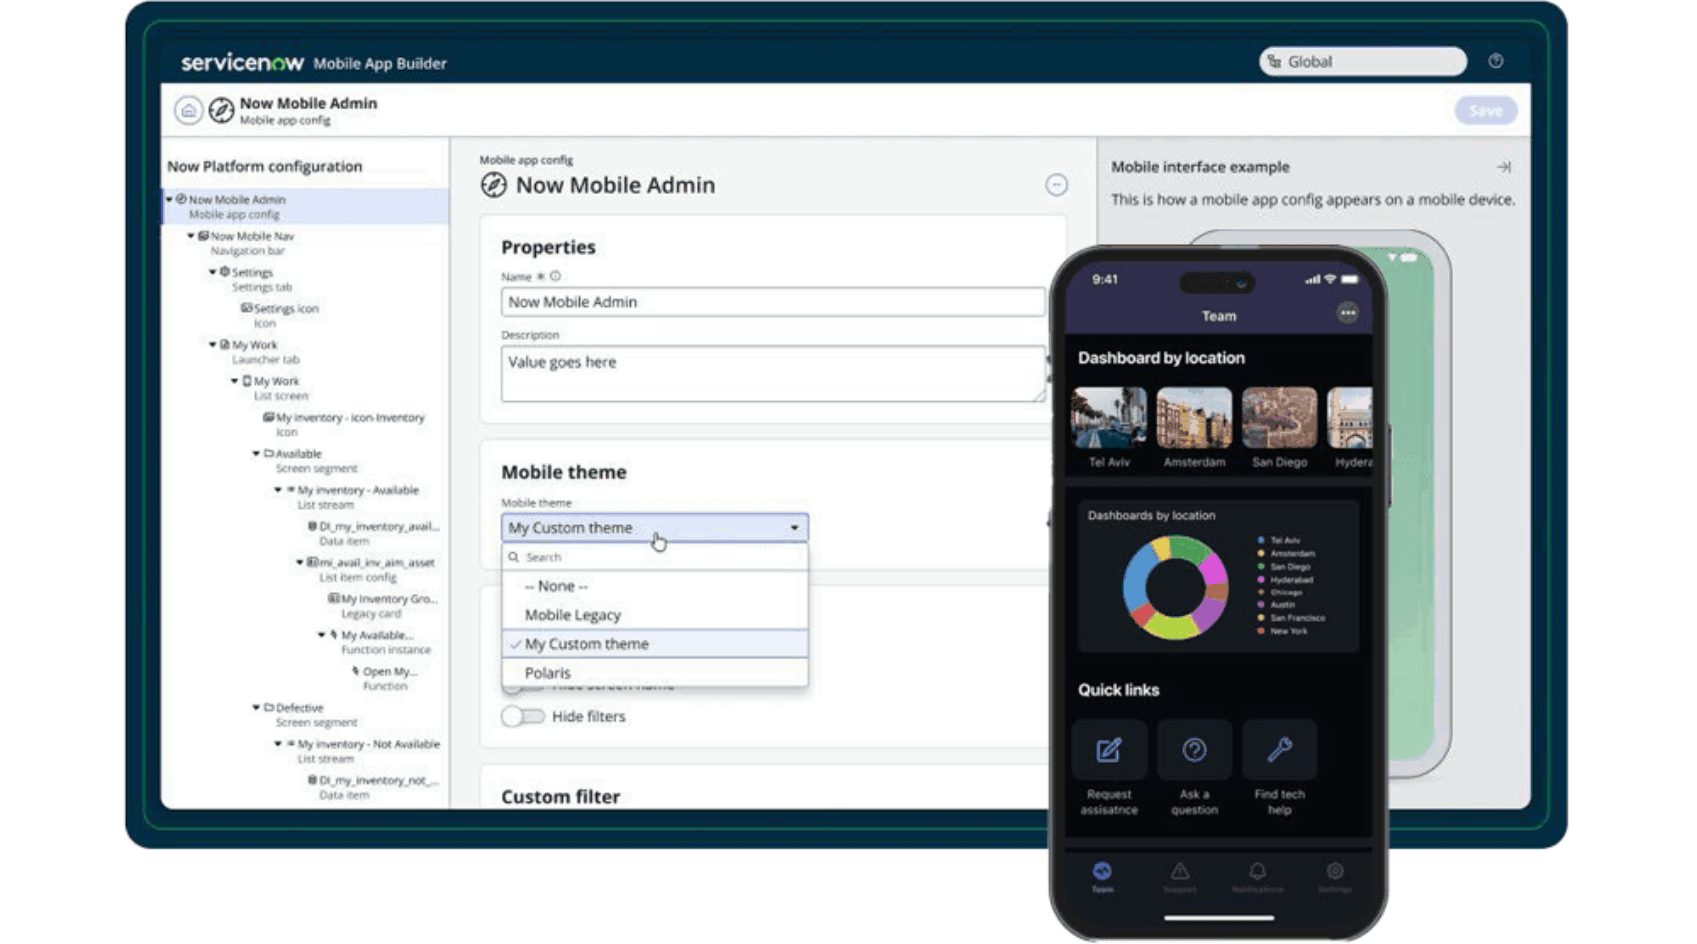 A screenshot of the Now Mobile Admin portal page showing the custom theme mobile option being selected.